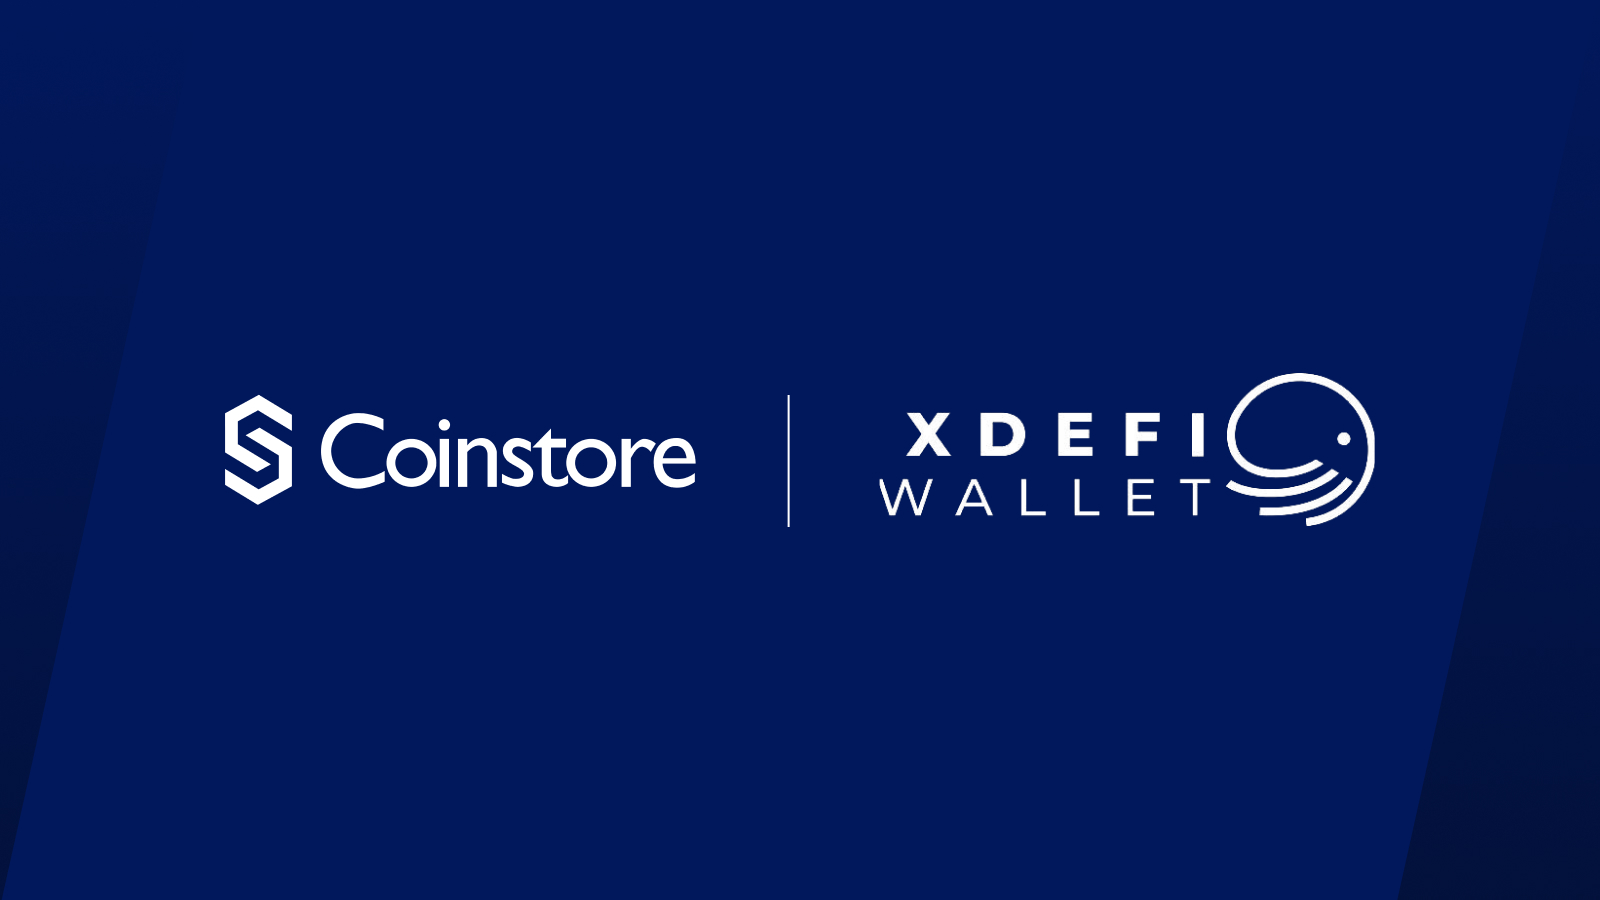 , Coinstore partners with XDEFI Wallet to bring DeFi and Web3 to its 4 million-strong user base